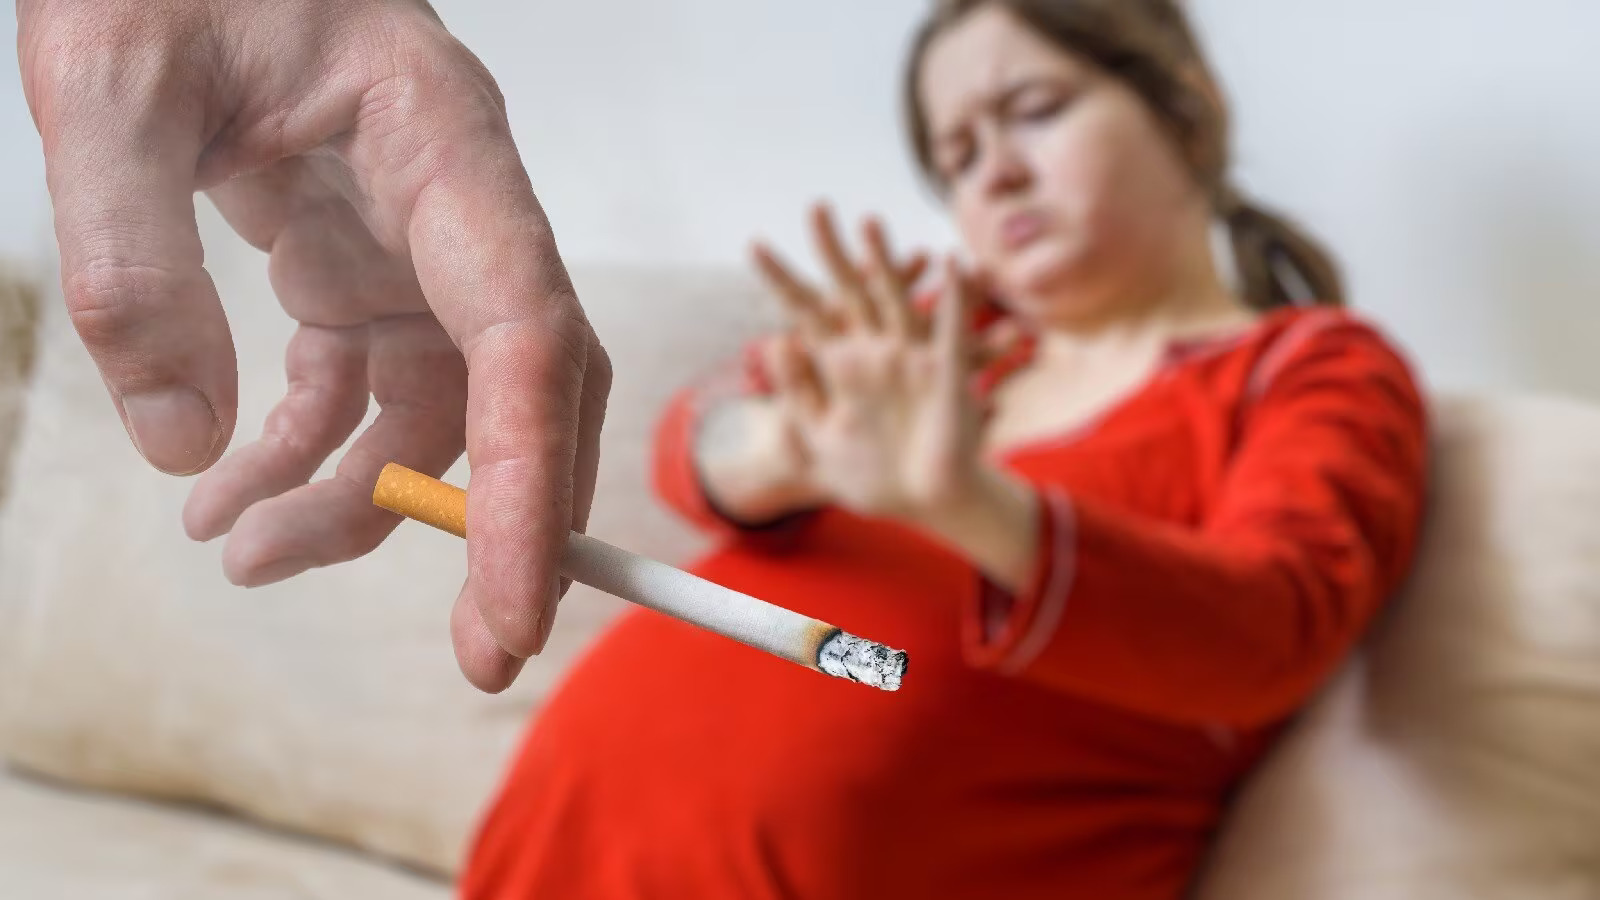 'Pregnant woman holding a lit cigarette with a red circle and slash symbol over it. The image highlights the risks and dangers associated with smoking while pregnant, including increased likelihood of premature birth, low birth weight, miscarriage, stillbirth, and various health complications for both the mother and the unborn child.